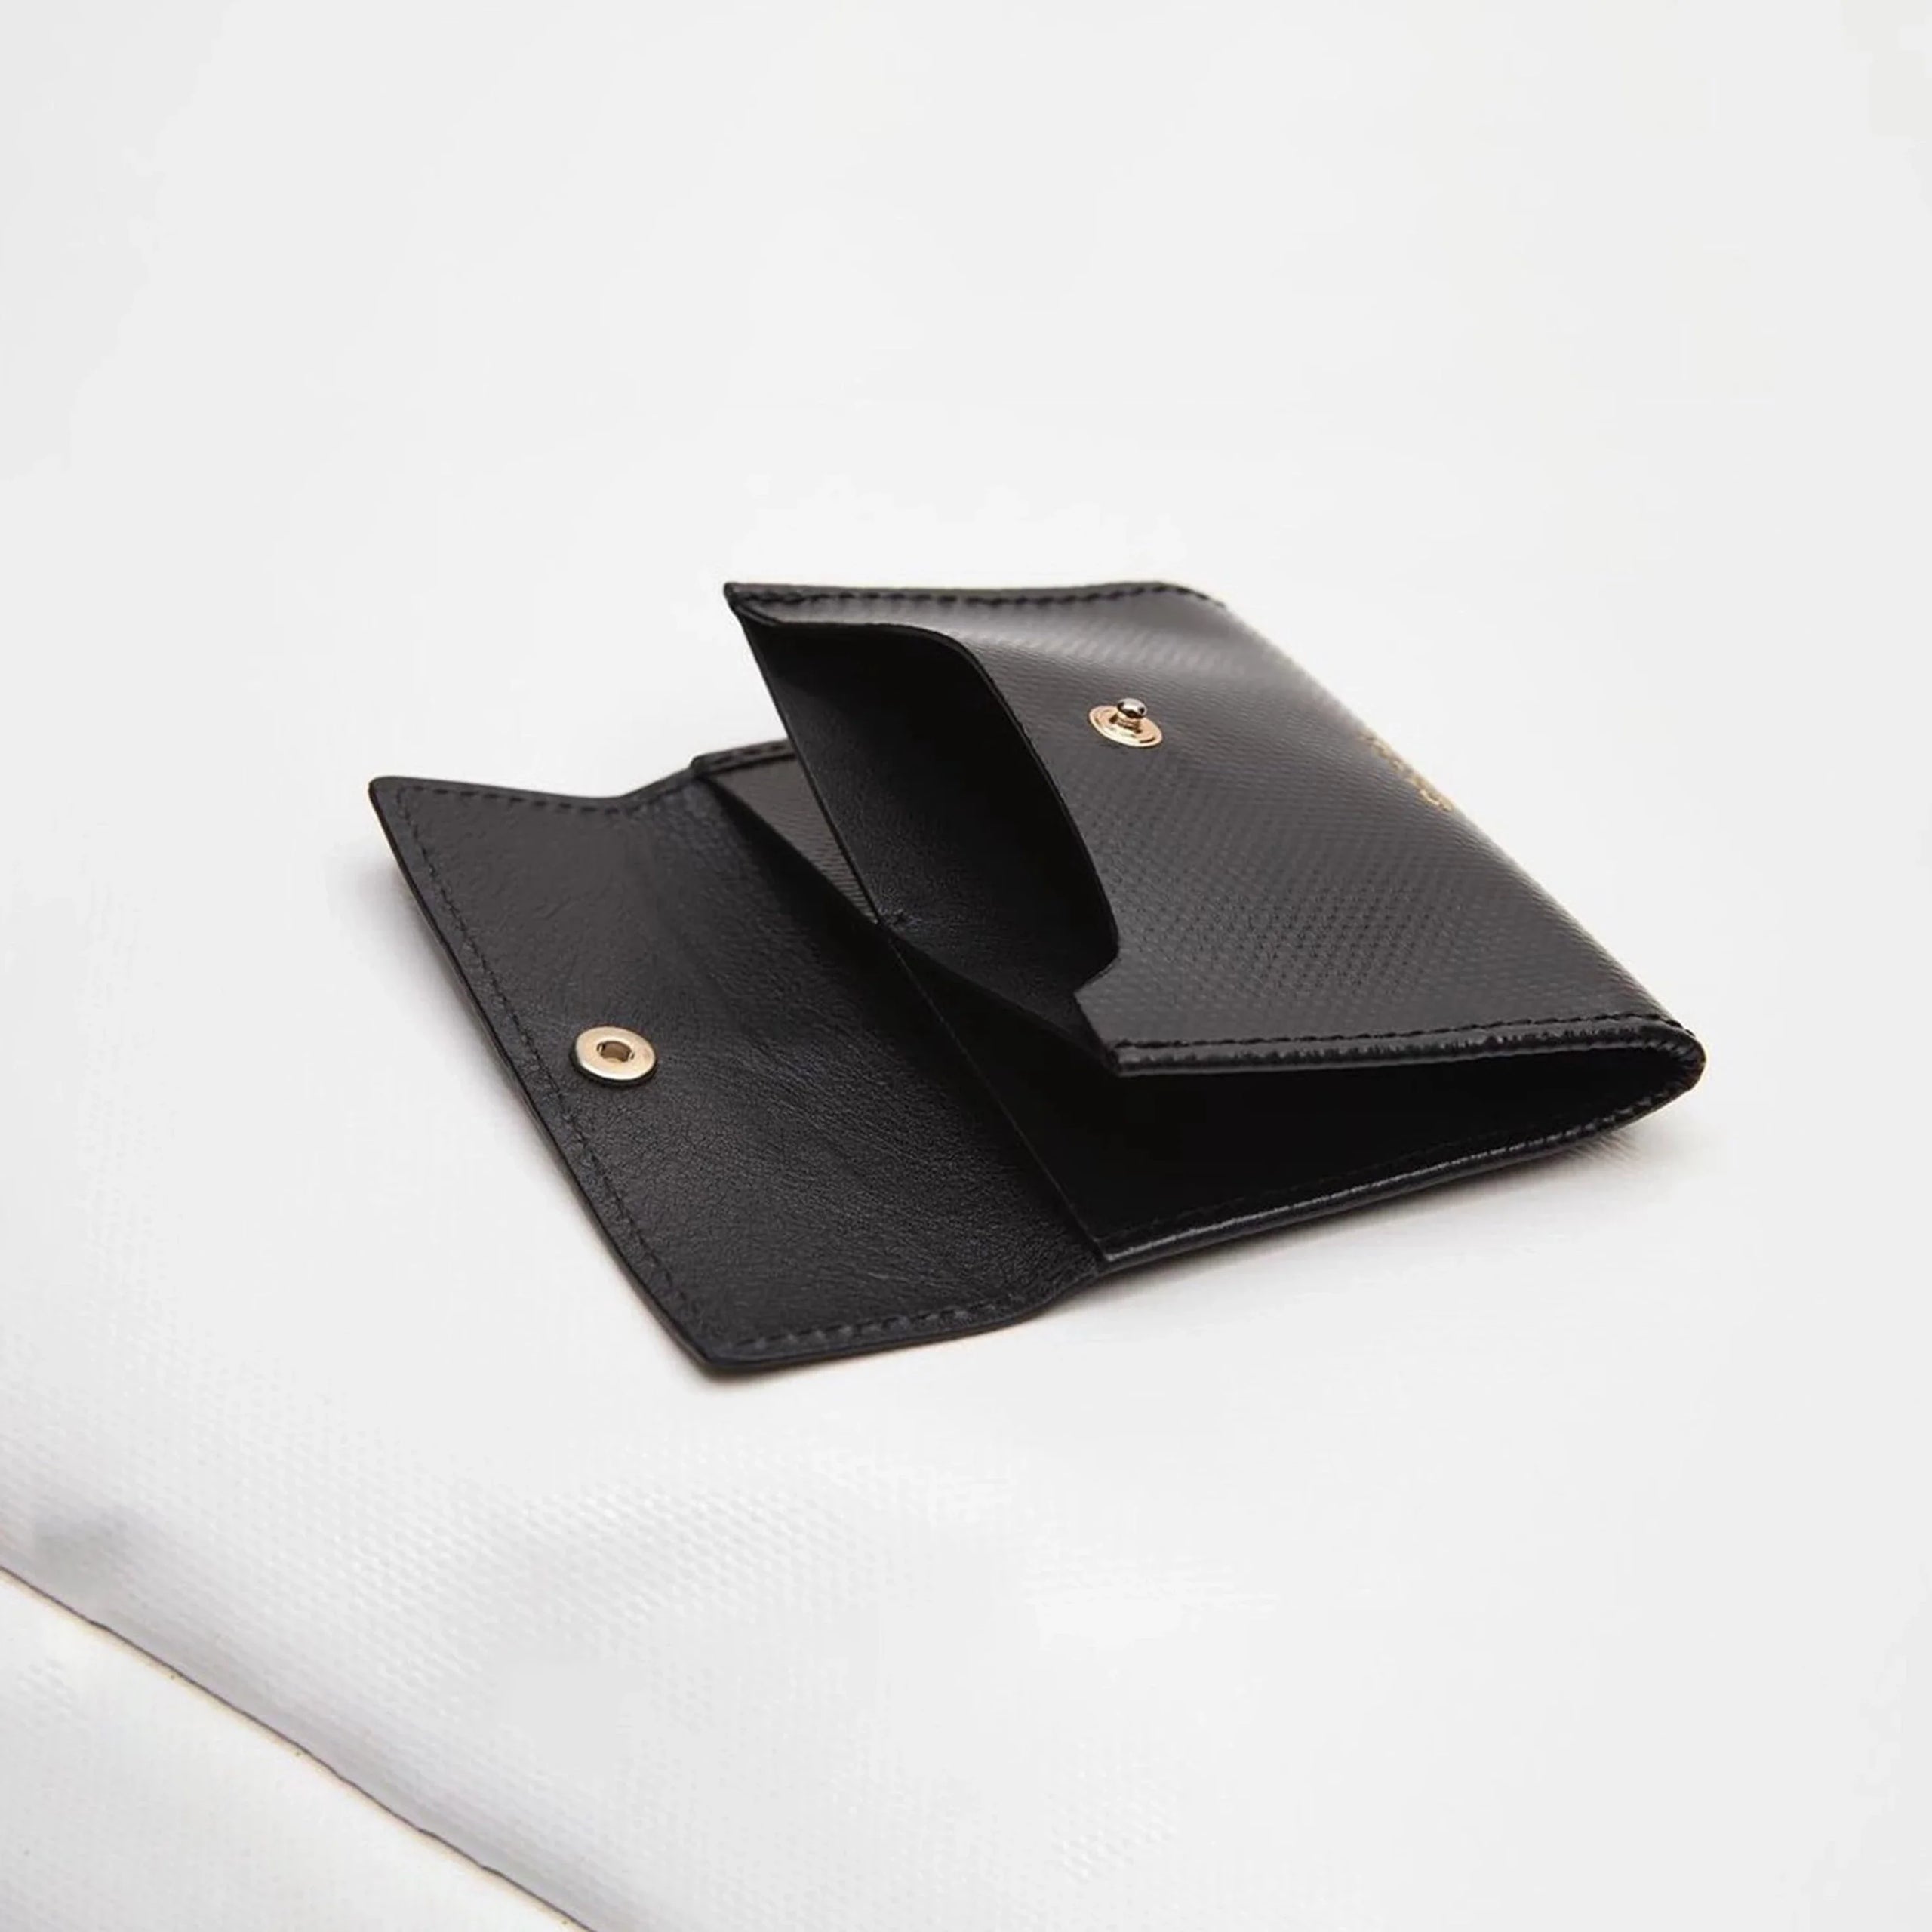 The Black Wallet